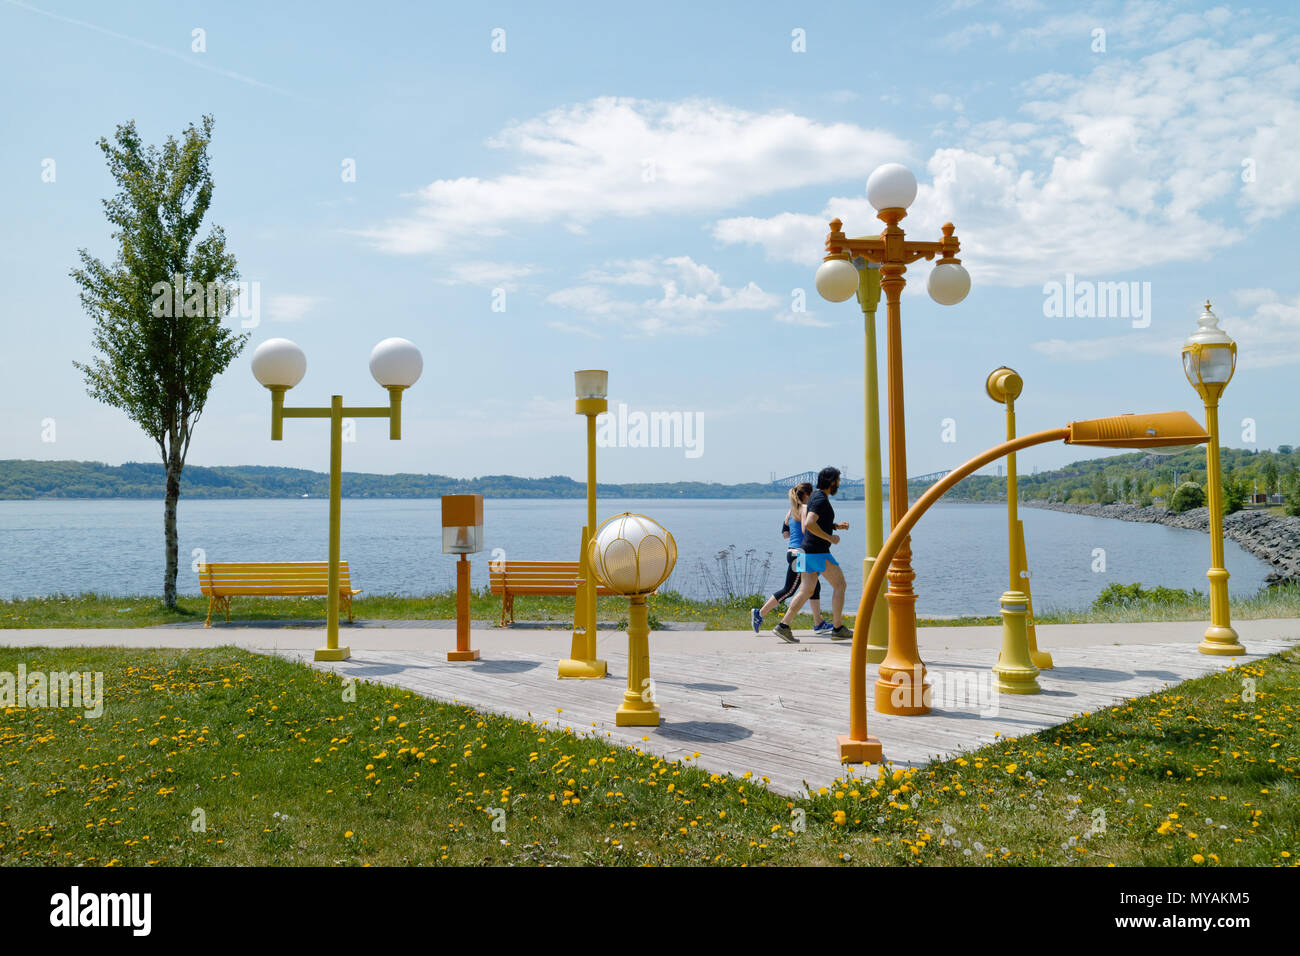 A display of old street lamps on the Promenade Samual de Champlain in Quebec City, Canada Stock Photo